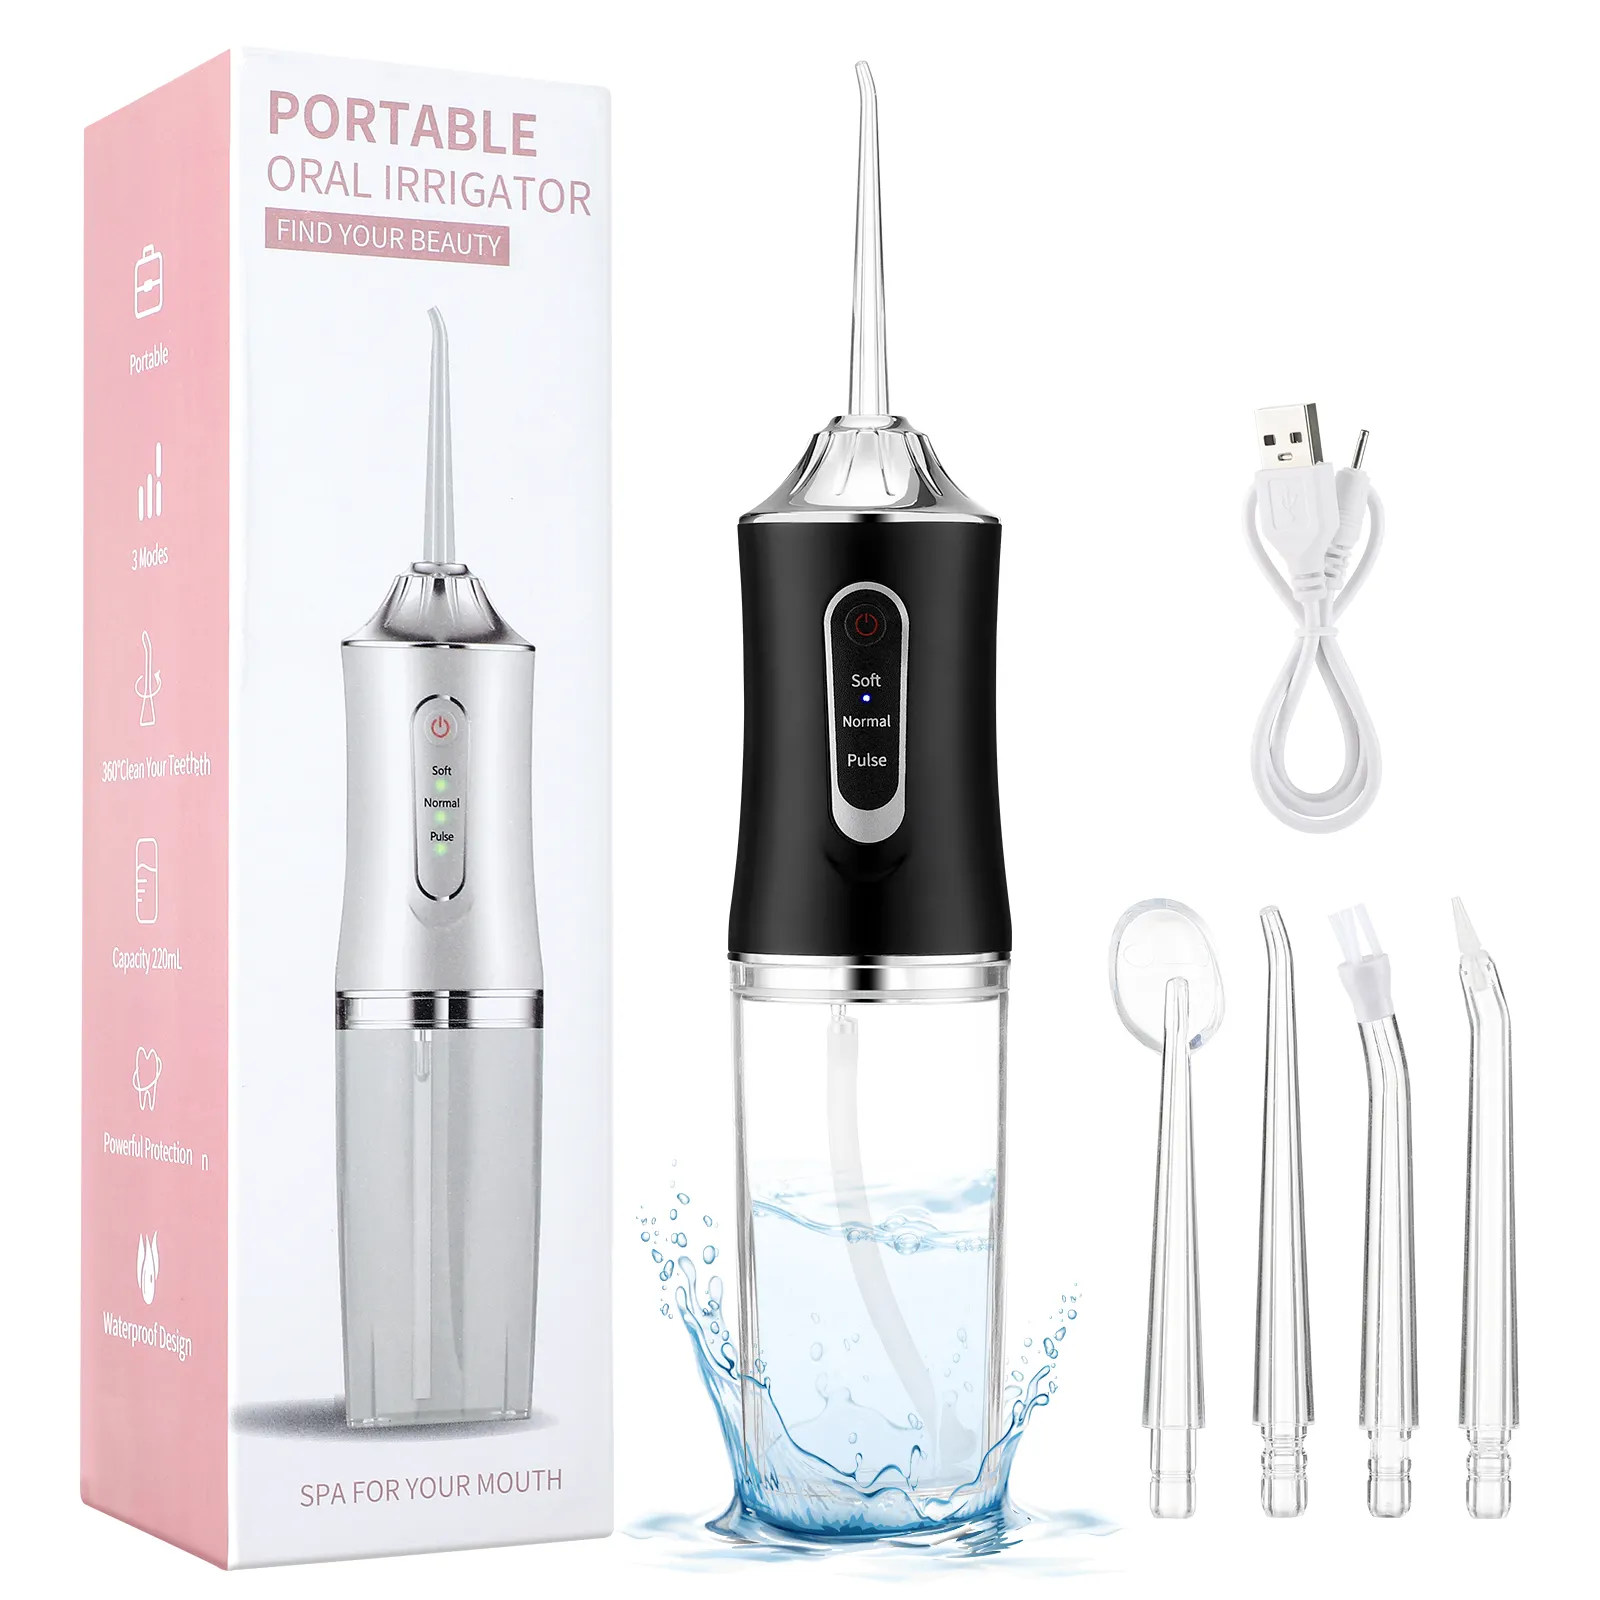 Cordless Water Flosser Portable Oral Teeth Irrigator Rechargeable Dental Floss Tooth Cleaner